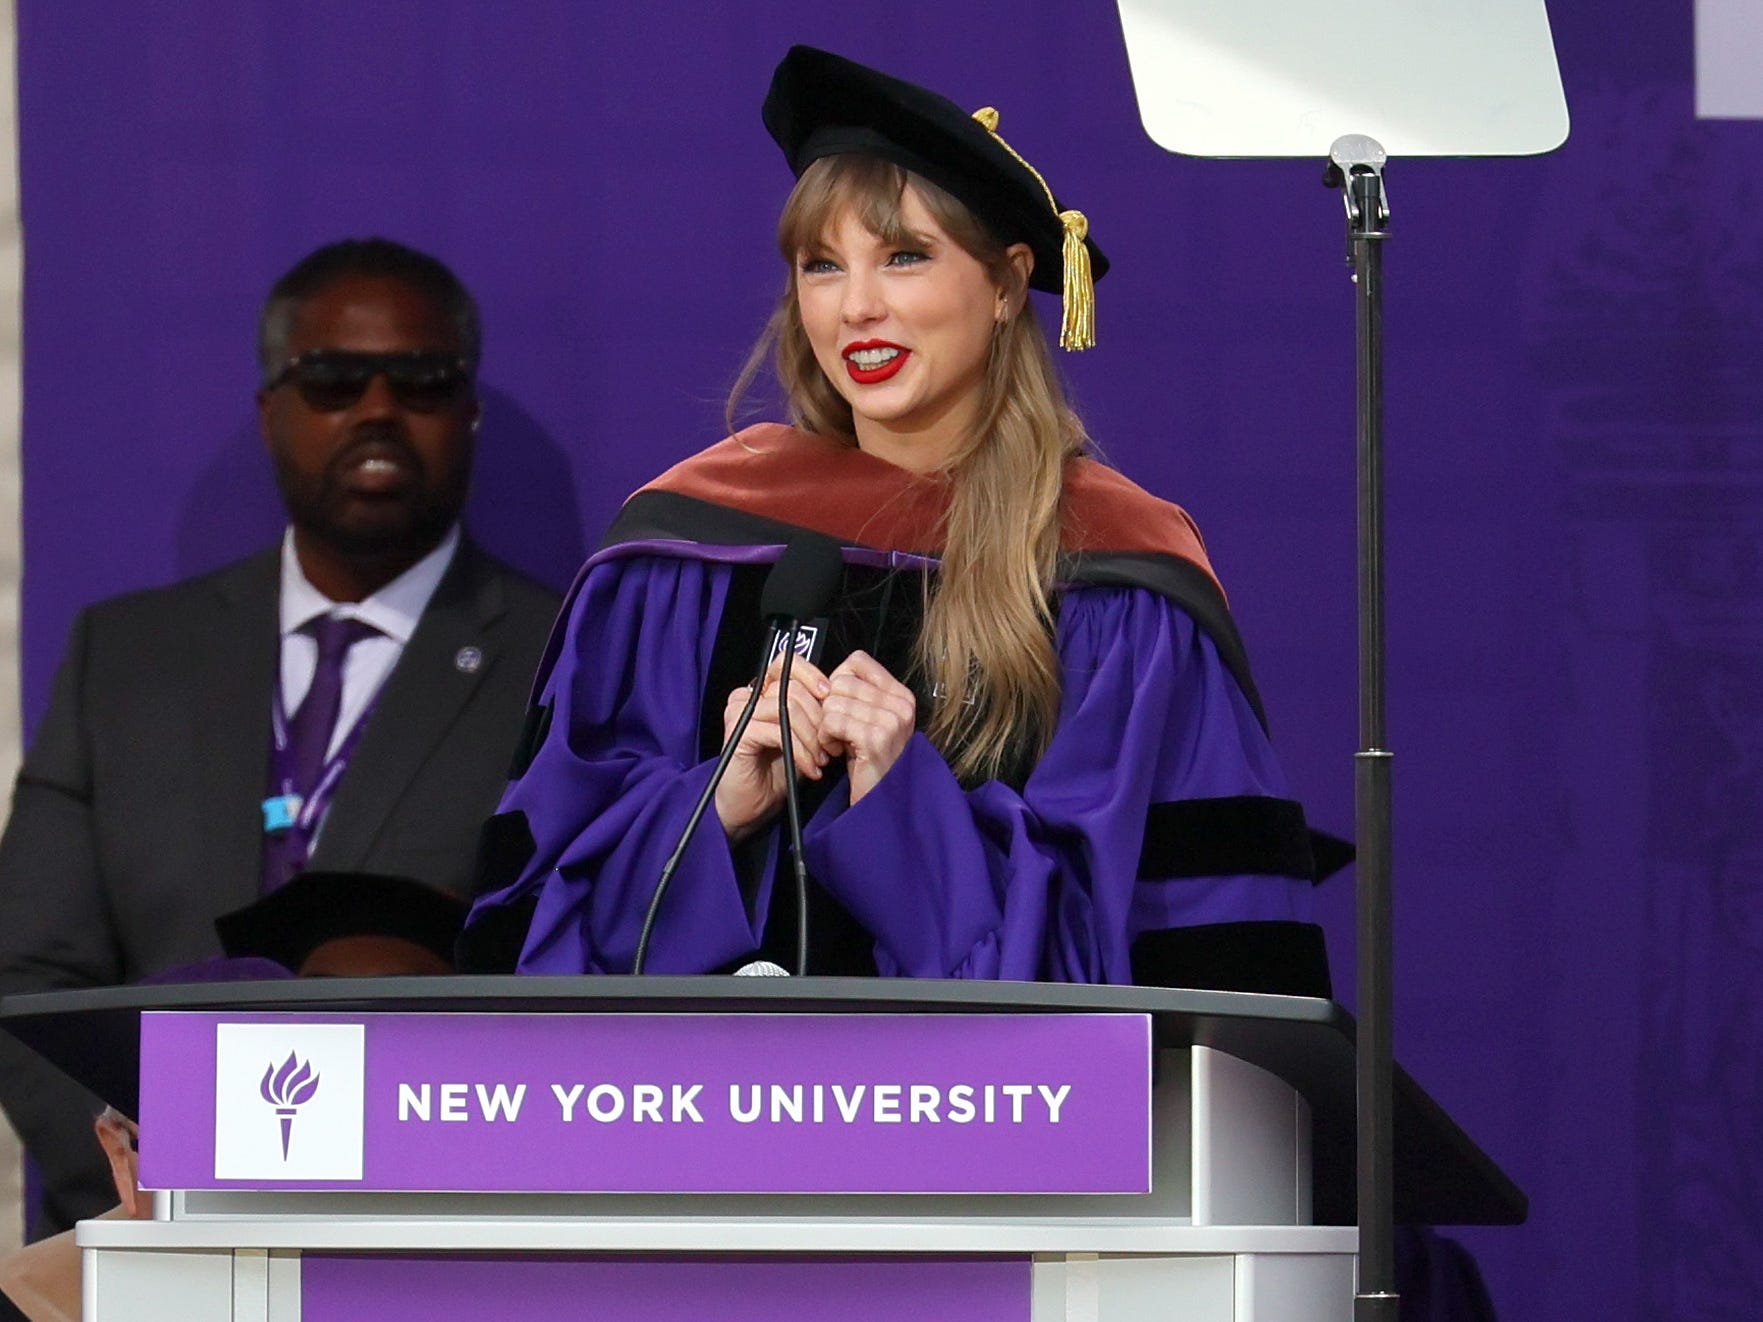 <p>In her first public appearance of 2022, Taylor Swift poked fun at her "cringe" fashion moments and her experience of growing up in the public eye, which led to receiving a lot of unsolicited career advice.</p><p>"I became a young adult while being fed the message that if I didn't make any mistakes, all the children of America would grow up to be perfect angels. However, if I did slip up, the entire Earth would fall off its axis and it would be entirely my fault and I would go to pop star jail forever and ever," Swift said in her speech. "It was all centered around the idea that mistakes equal failure and ultimately, the loss of any chance at a happy or rewarding life."</p><p>"This has not been my experience," she continued. "My experience has been that my mistakes led to the best things in my life."</p><p>She also alluded to her past feud with Kanye West, joking that "getting canceled on the internet and nearly losing my career gave me an excellent knowledge of all the types of wine."</p><p>She elaborated, saying that losing things doesn't just mean losing.</p><p>"A lot of the time, when we lose things, we gain things too," she said. </p>